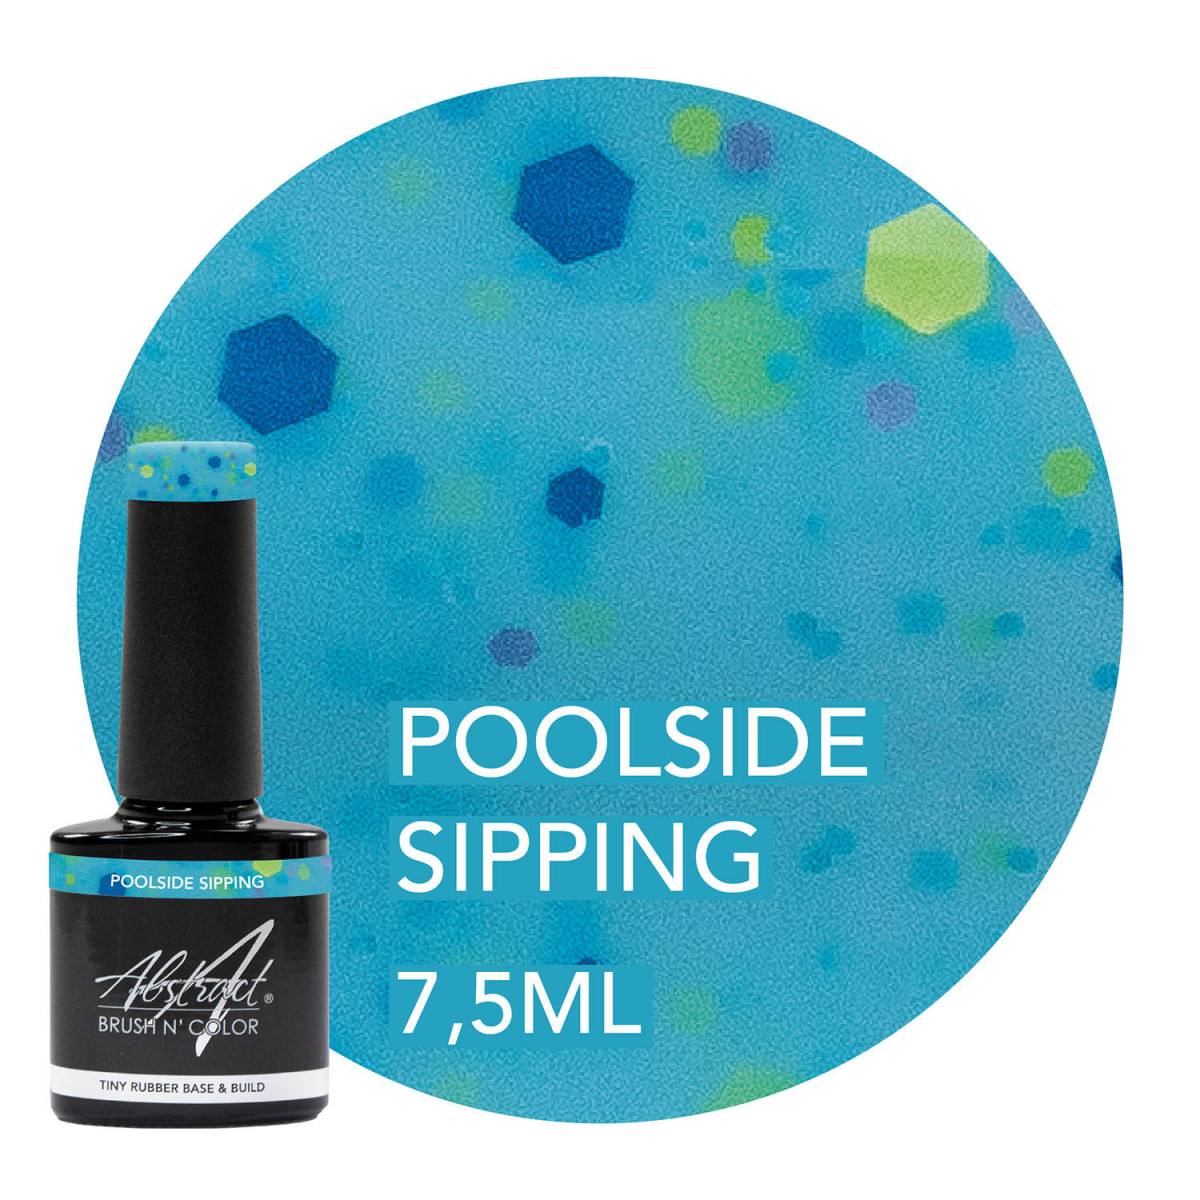 Poolside Glimming - TINY Rubber Base & Build Gel Abstract